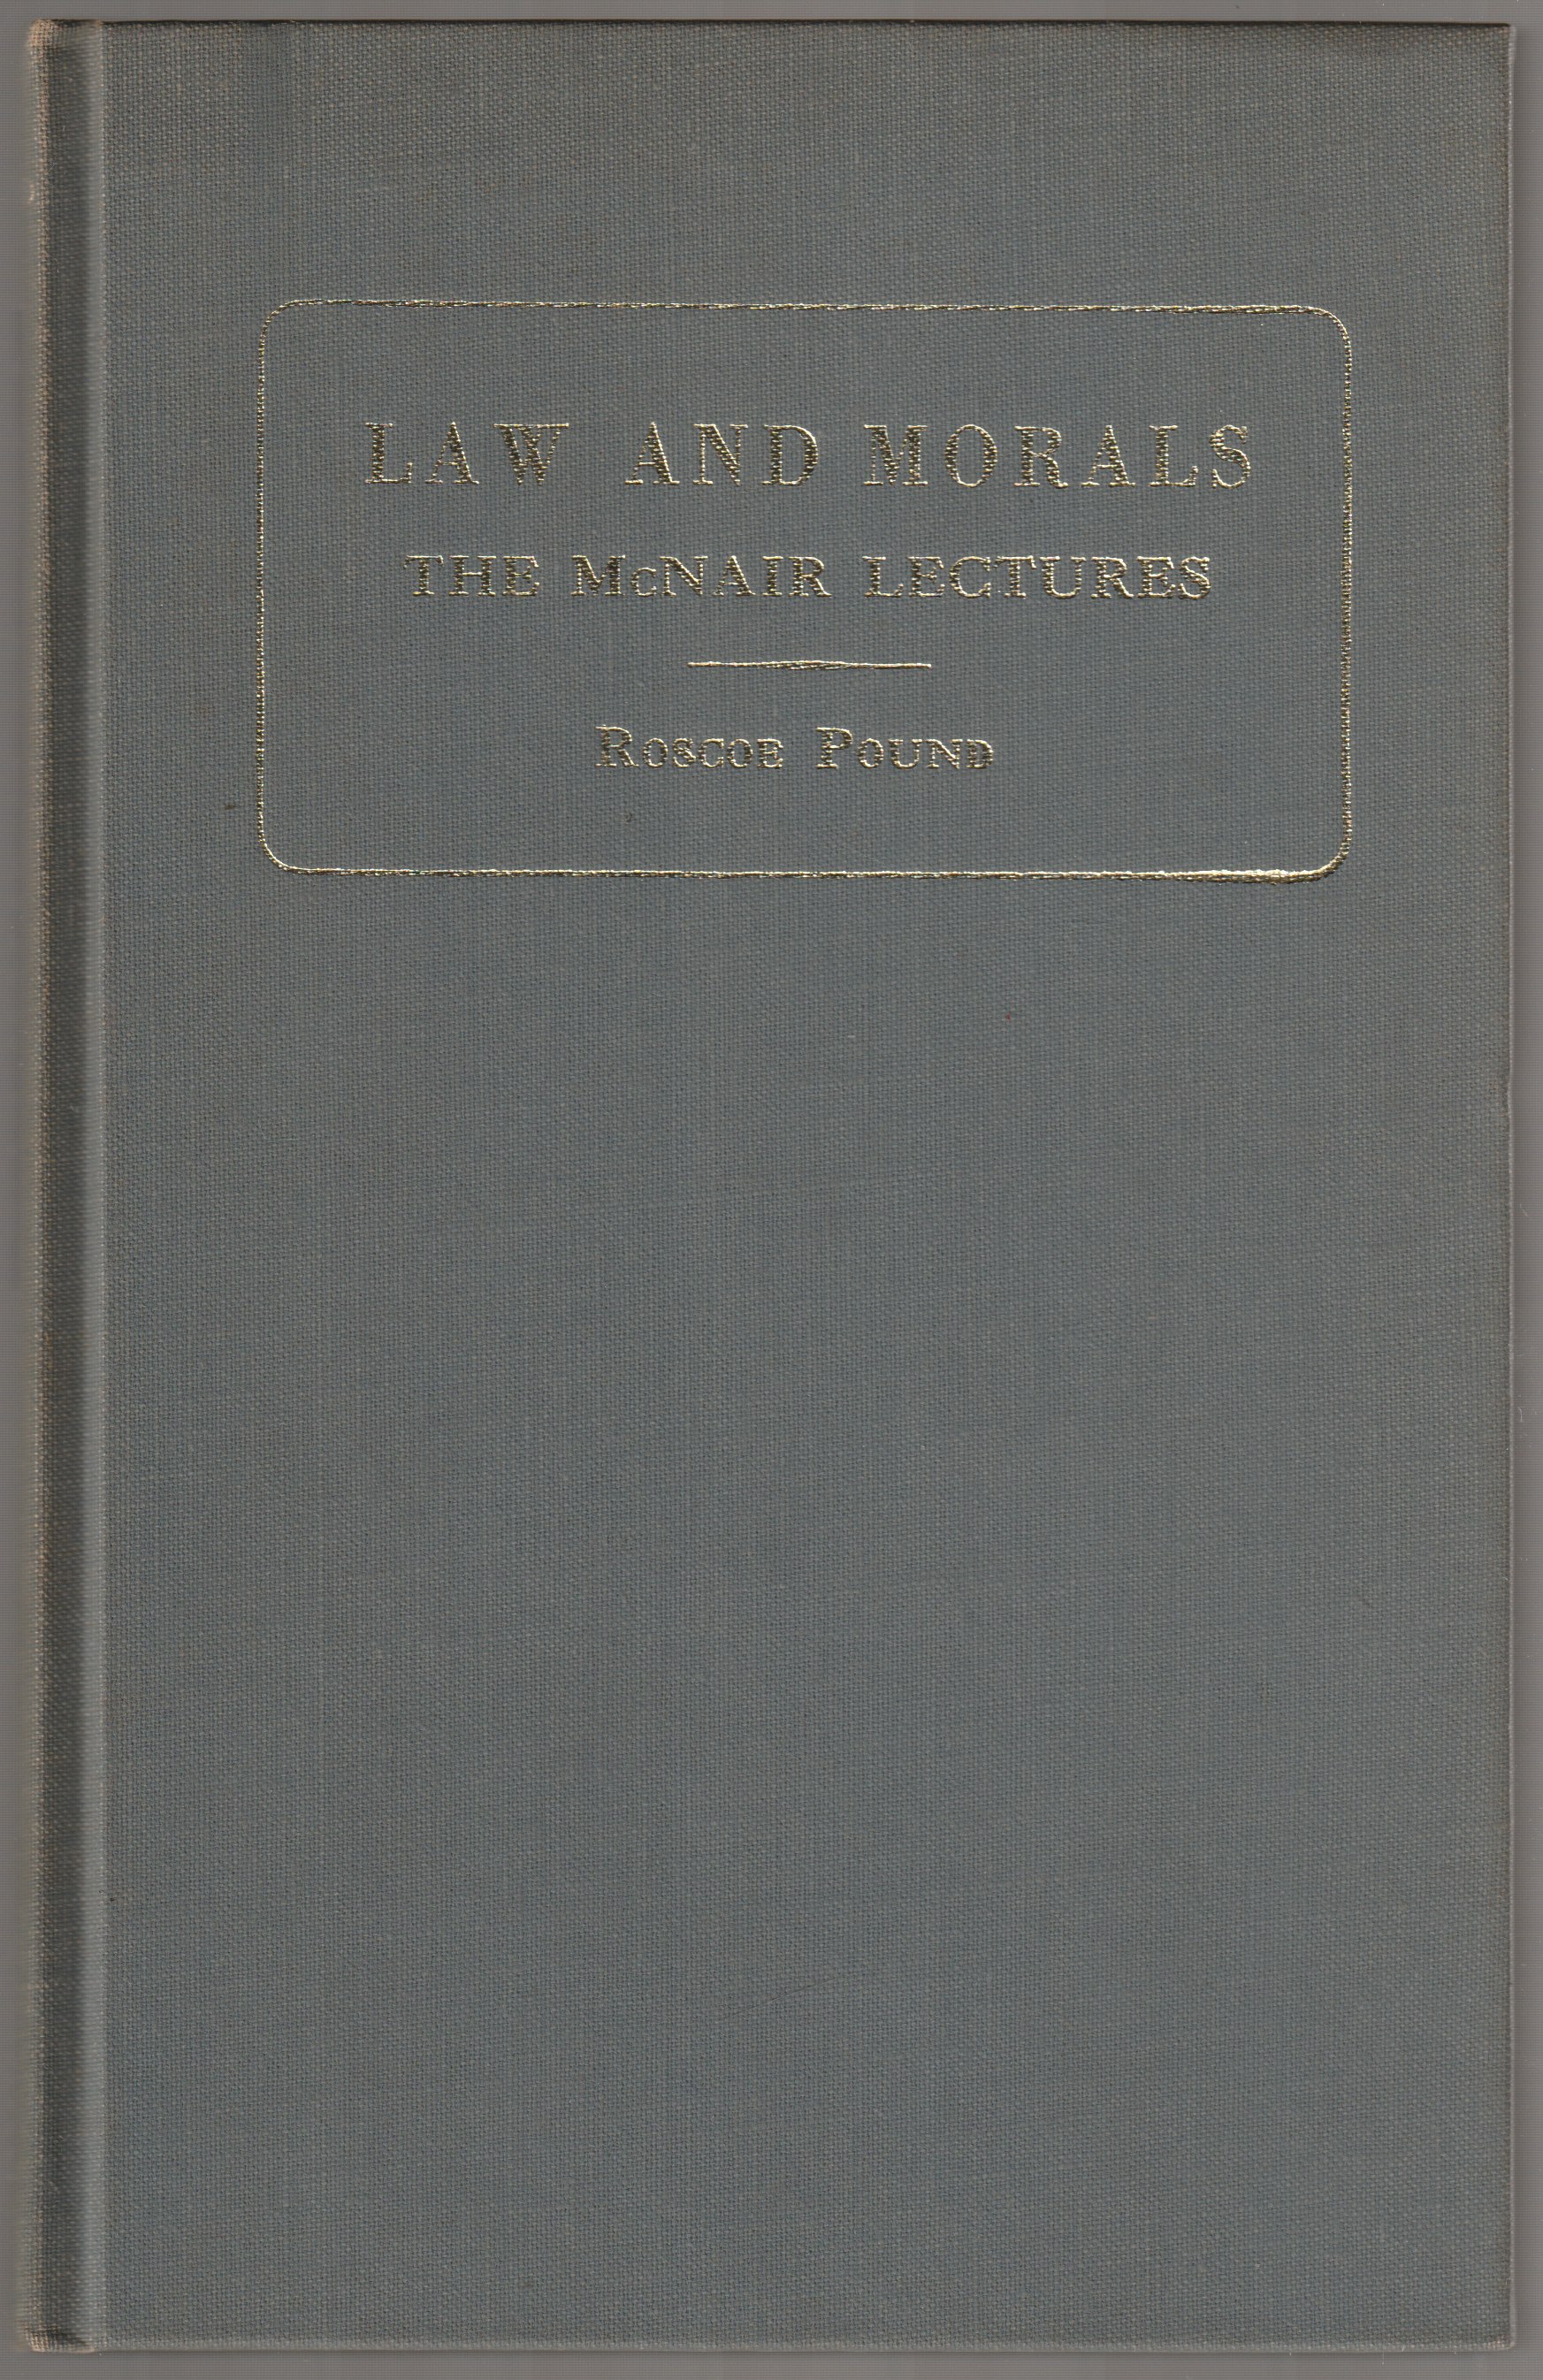 Law and morals : the McNair lectures, 1923, delivered at the University of North Carolina